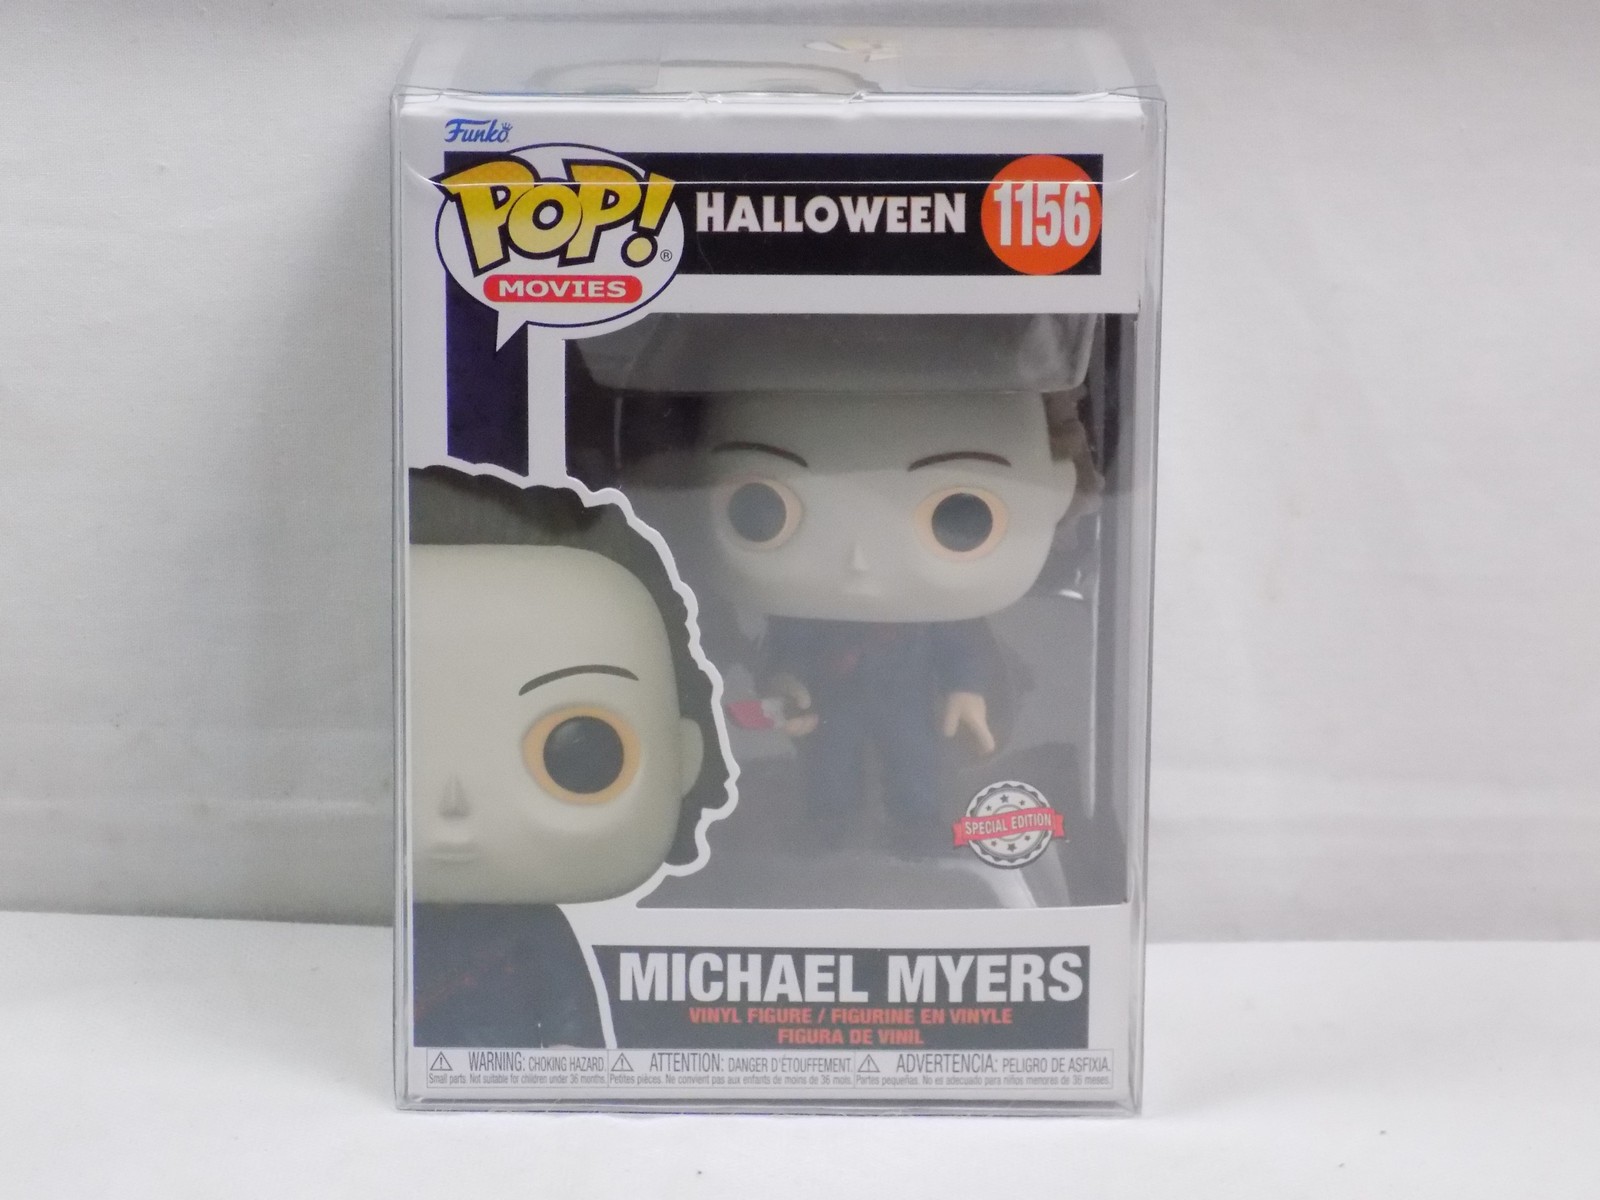 Figurine Michael Myers Bloody / Halloween / Funko Pop Movies 1156 /  Exclusive Special Edition